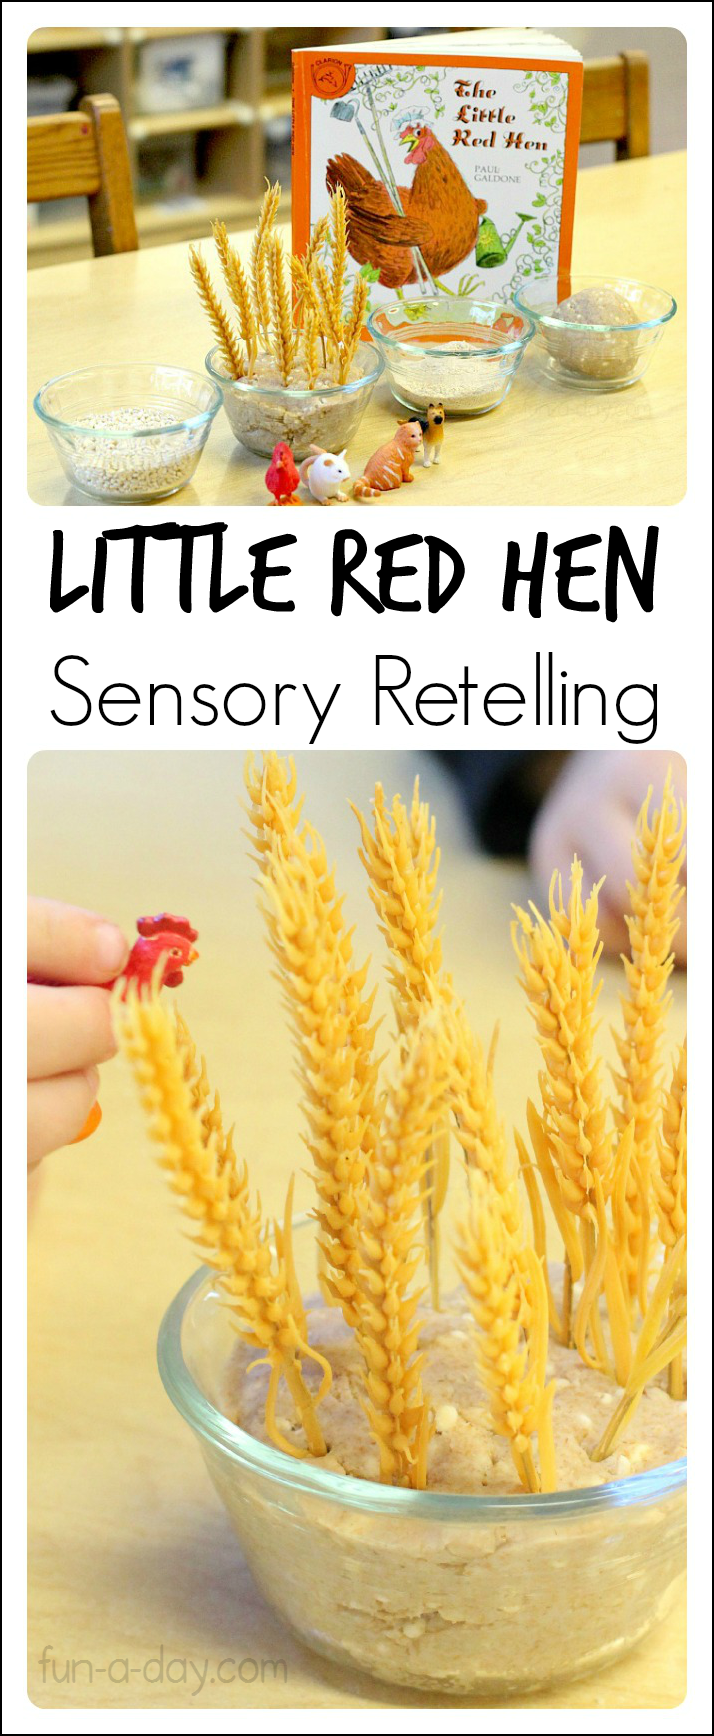 Hands-on retelling of the classic Little Red Hen story!